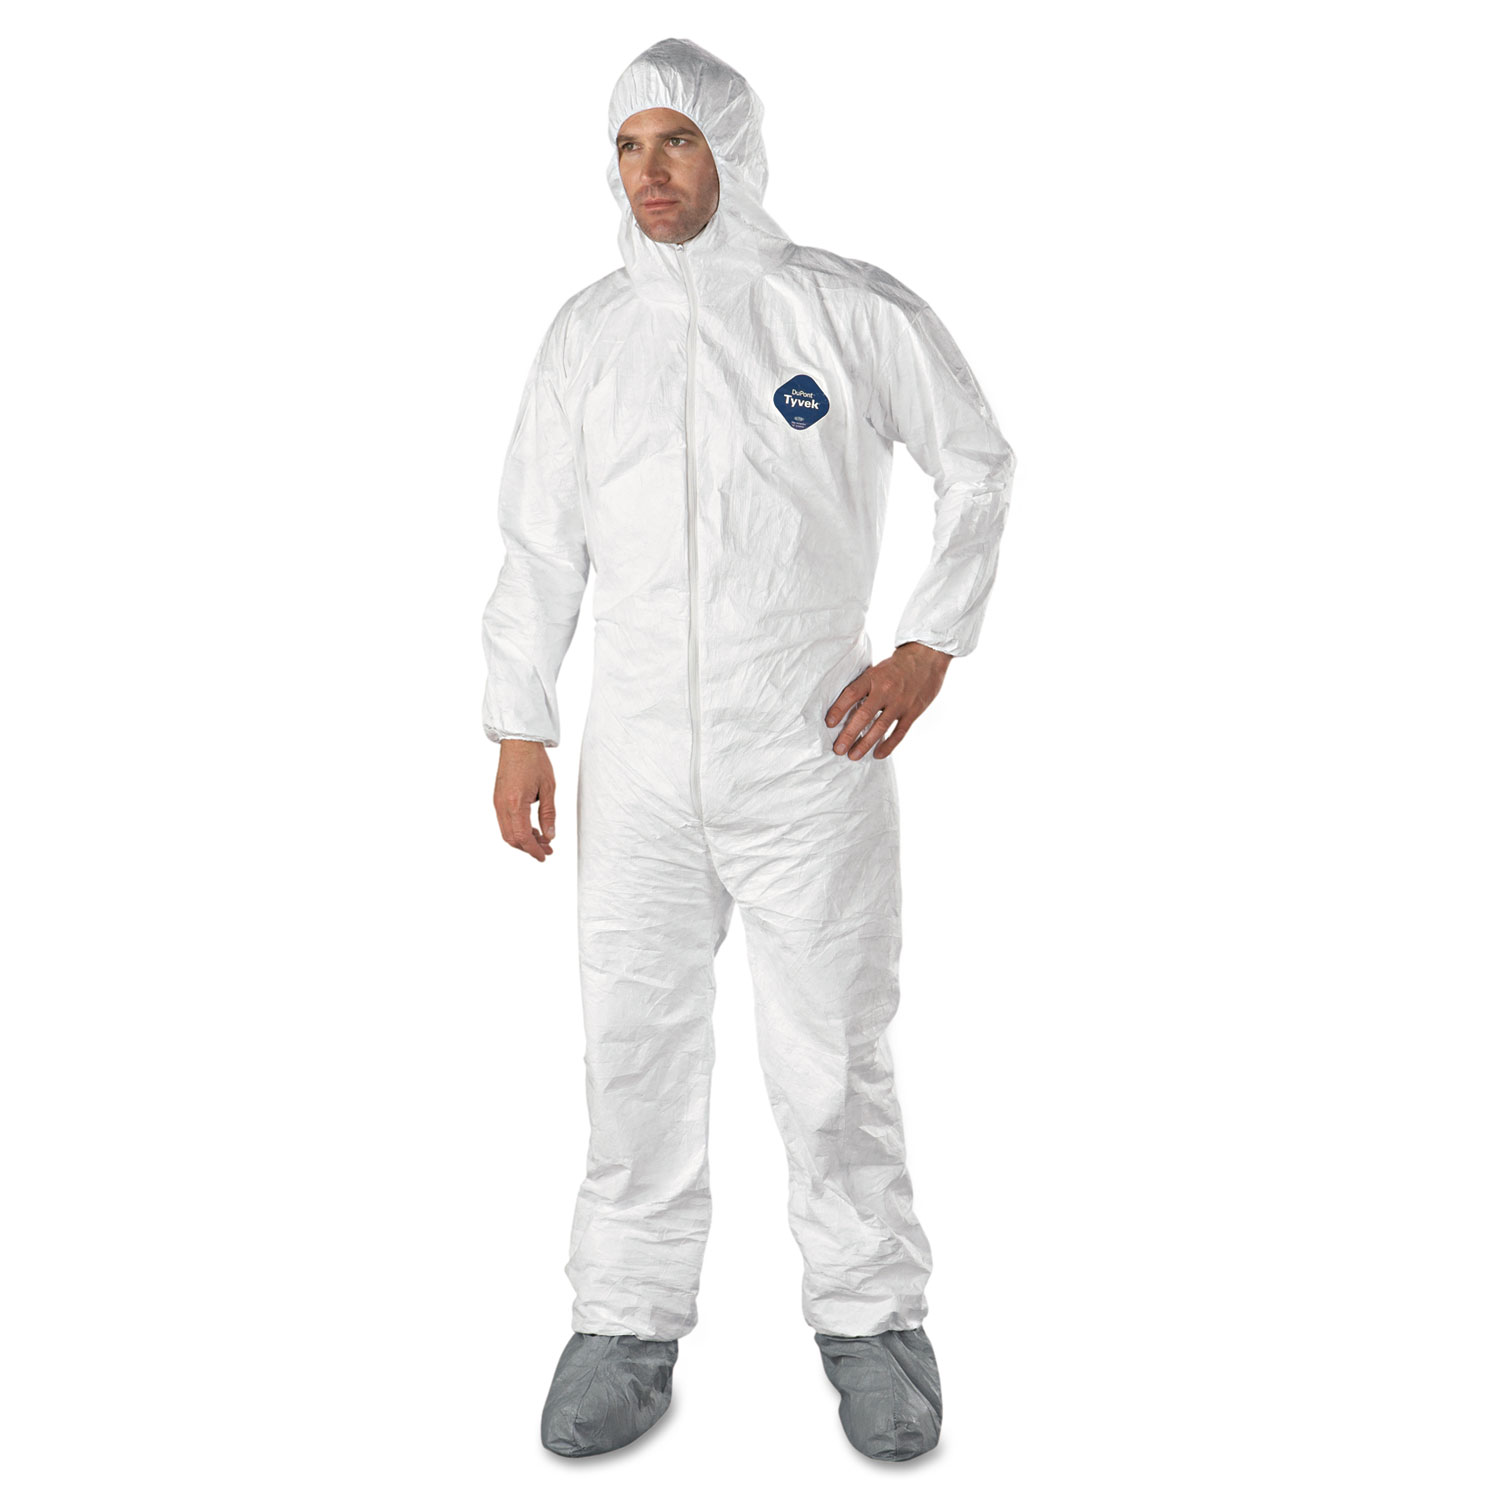  DuPont TY122SWHXL002500 Tyvek Elastic-Cuff Hooded Coveralls w/Boots, White, X-Large, 25/Carton (DUPTY122SXL) 